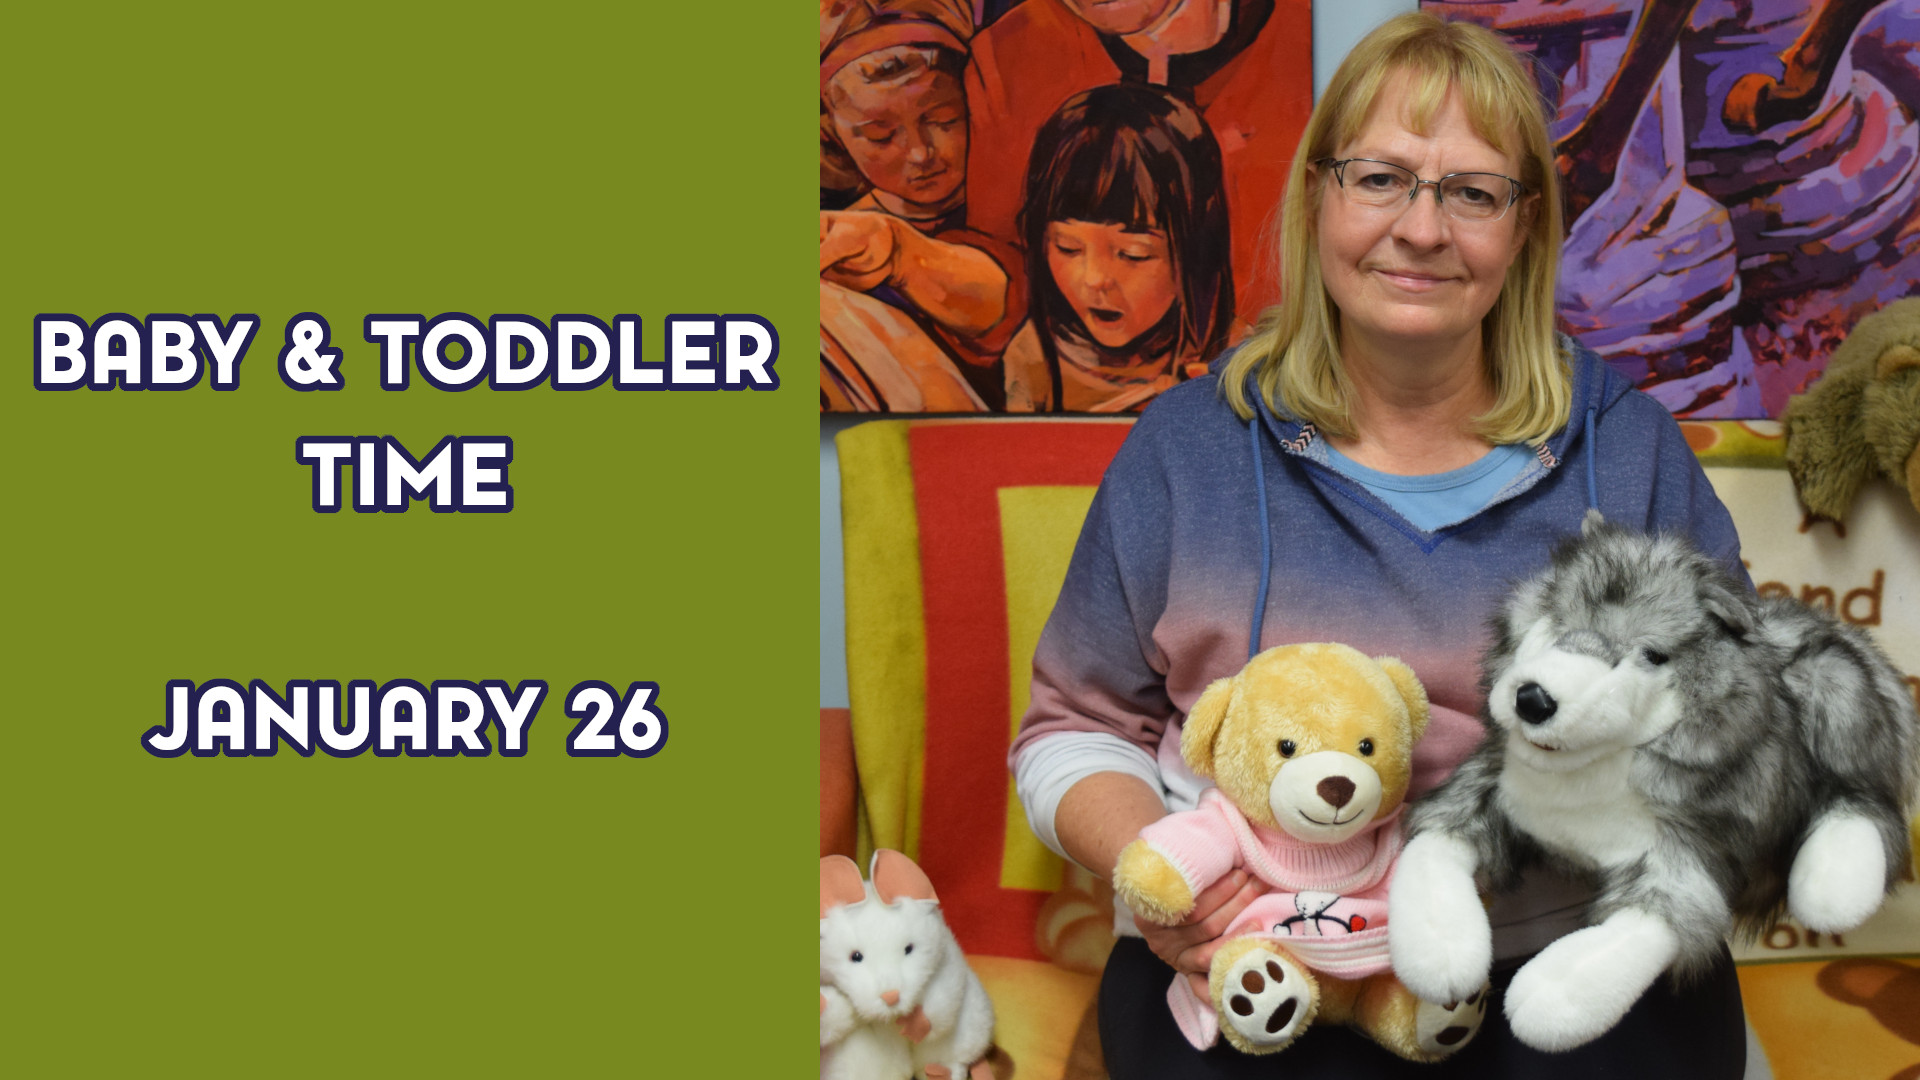 A woman holds stuffed animals next to the text "Baby and Toddler Time January 26"